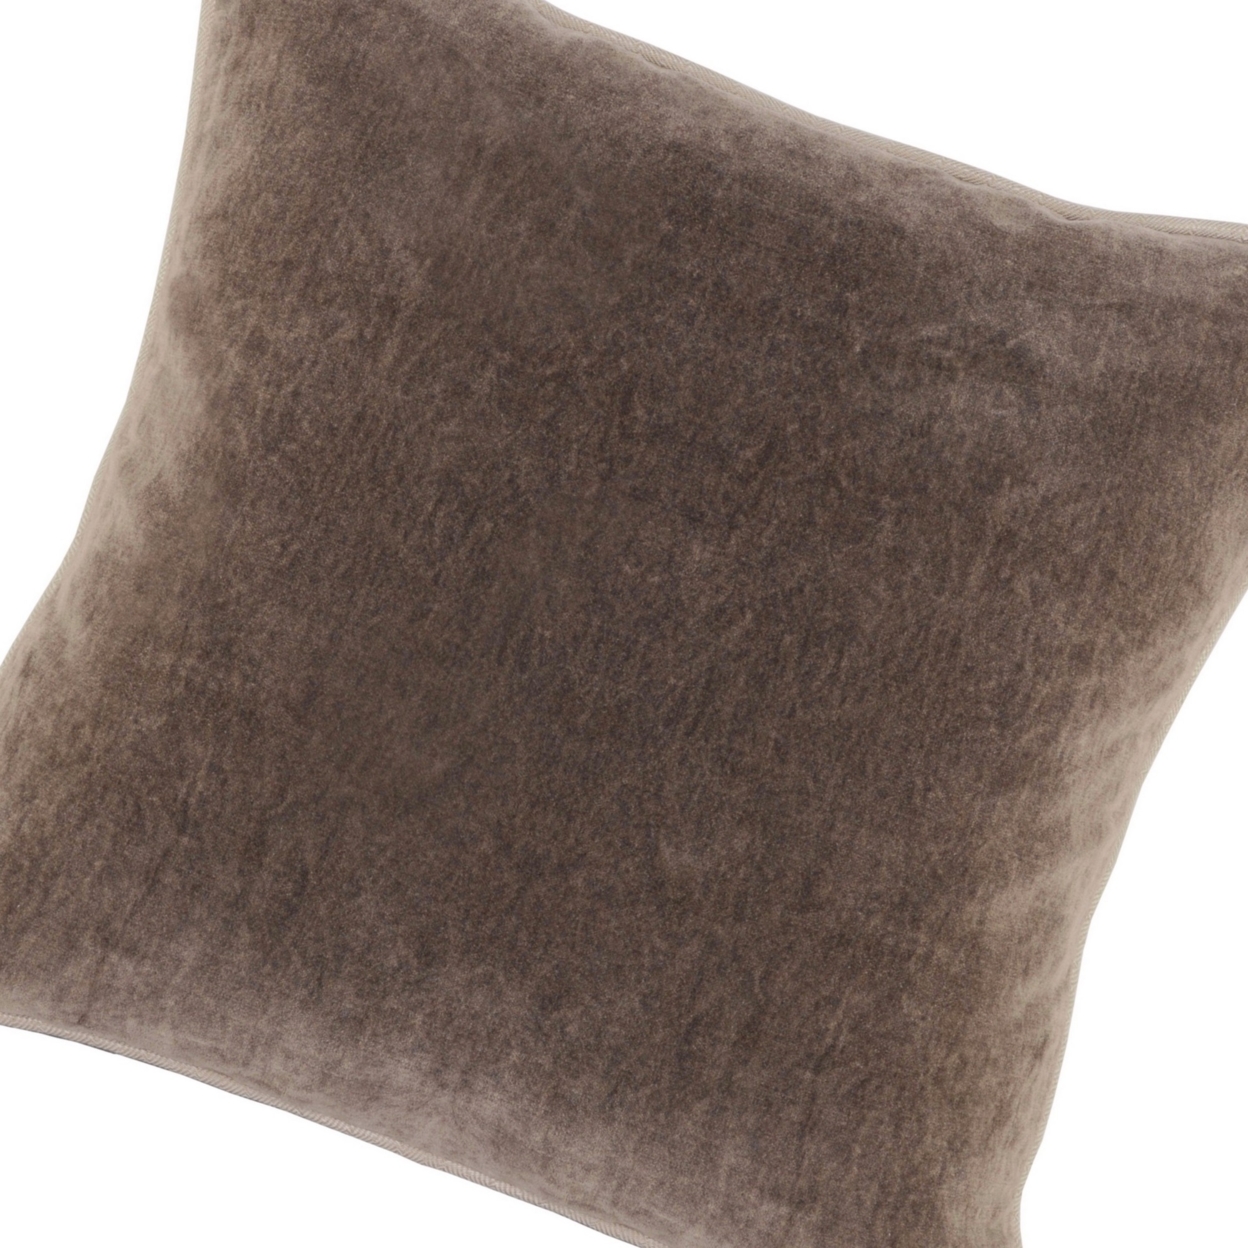 Square Fabric Throw Pillow With Solid Color And Piped Edges, Taupe Brown- Saltoro Sherpi